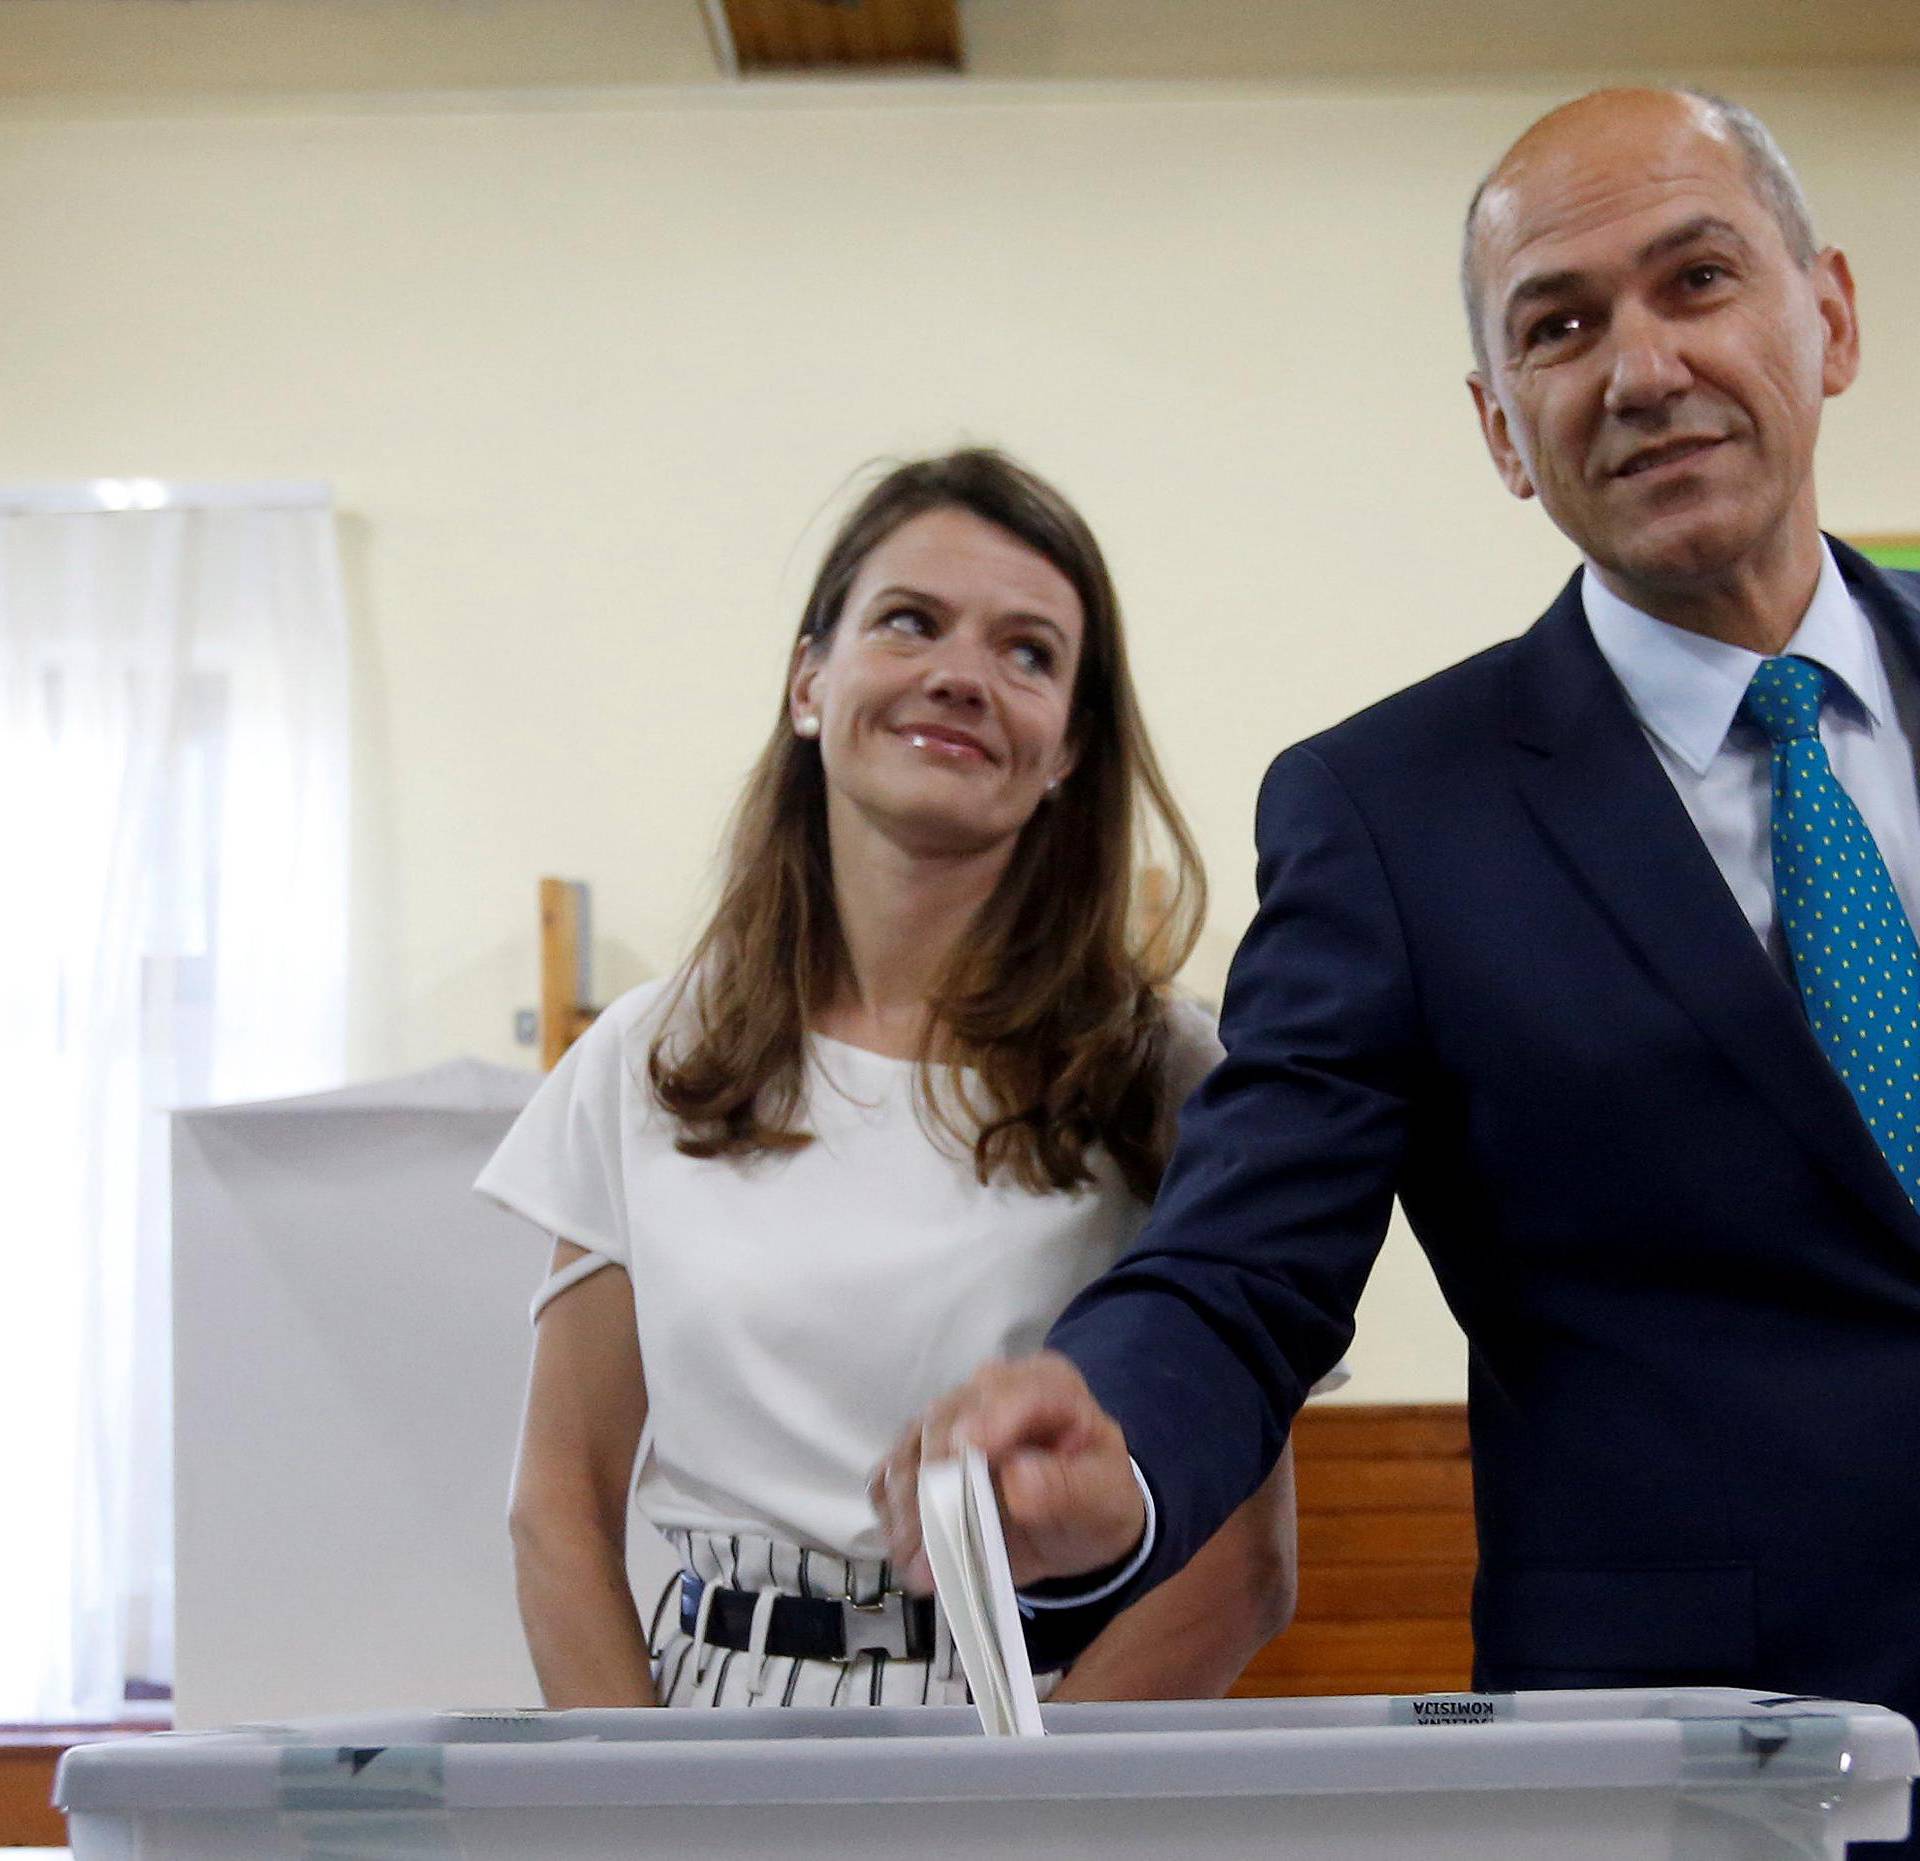 SDS leader Jansa and his wife cast their votes at a polling station during the general election in Velenje